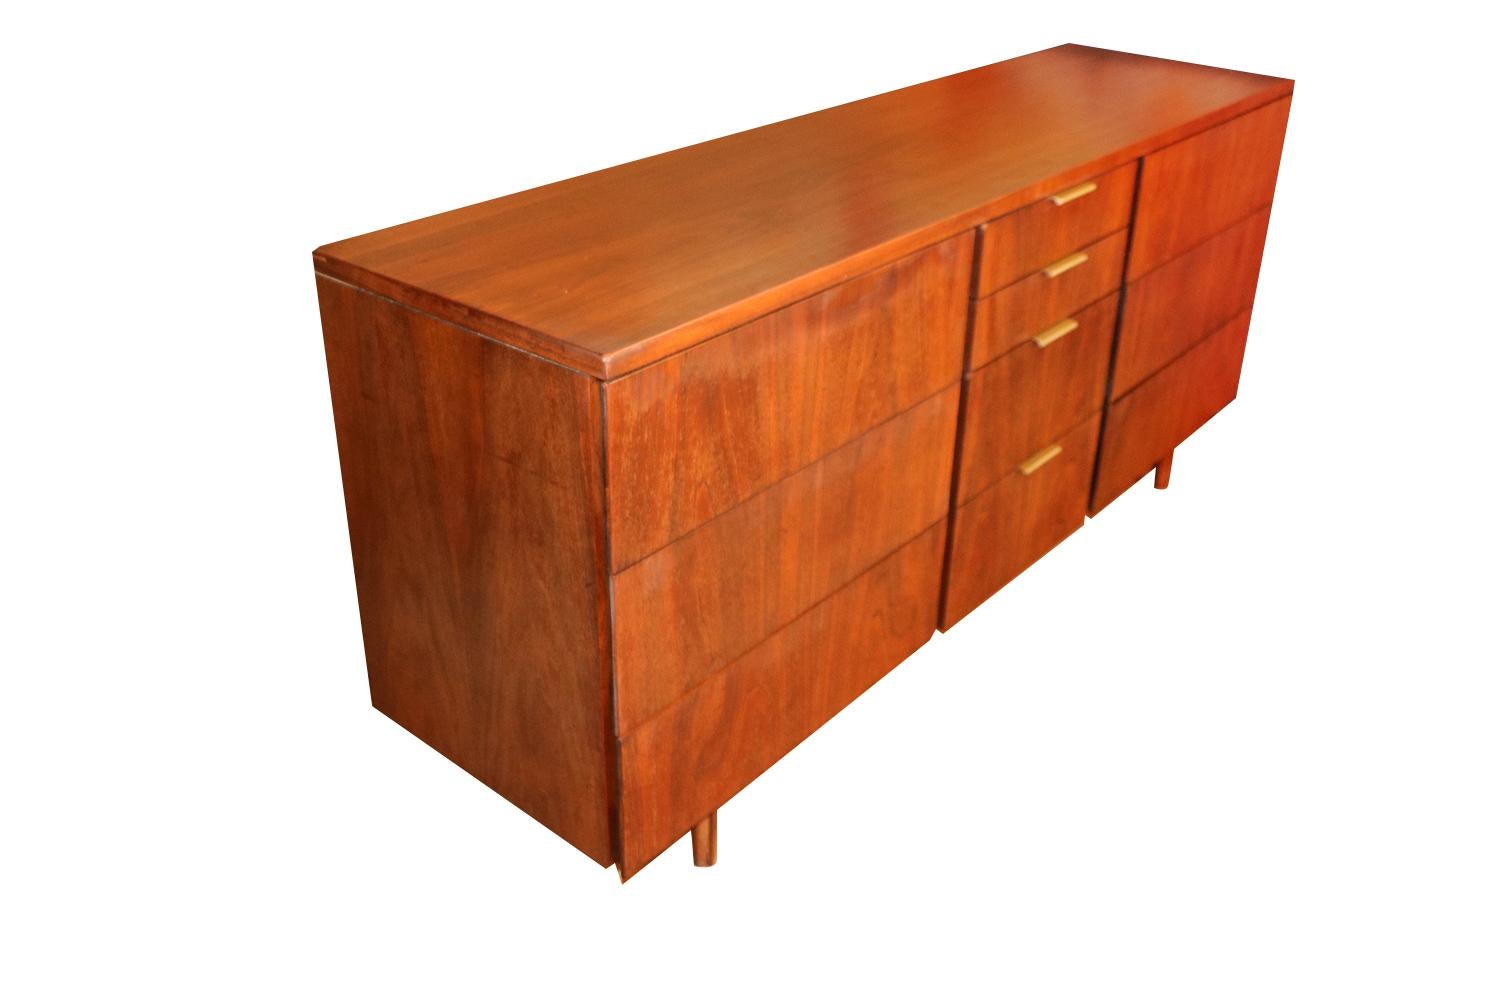 Absolutely stunning Mid-Century Modern dresser designed by John Stuart for Johnson Furniture Co. in the United States, circa 1960s. Pure style and sophistication, featuring a rectangular top over a center column of four drawers with original